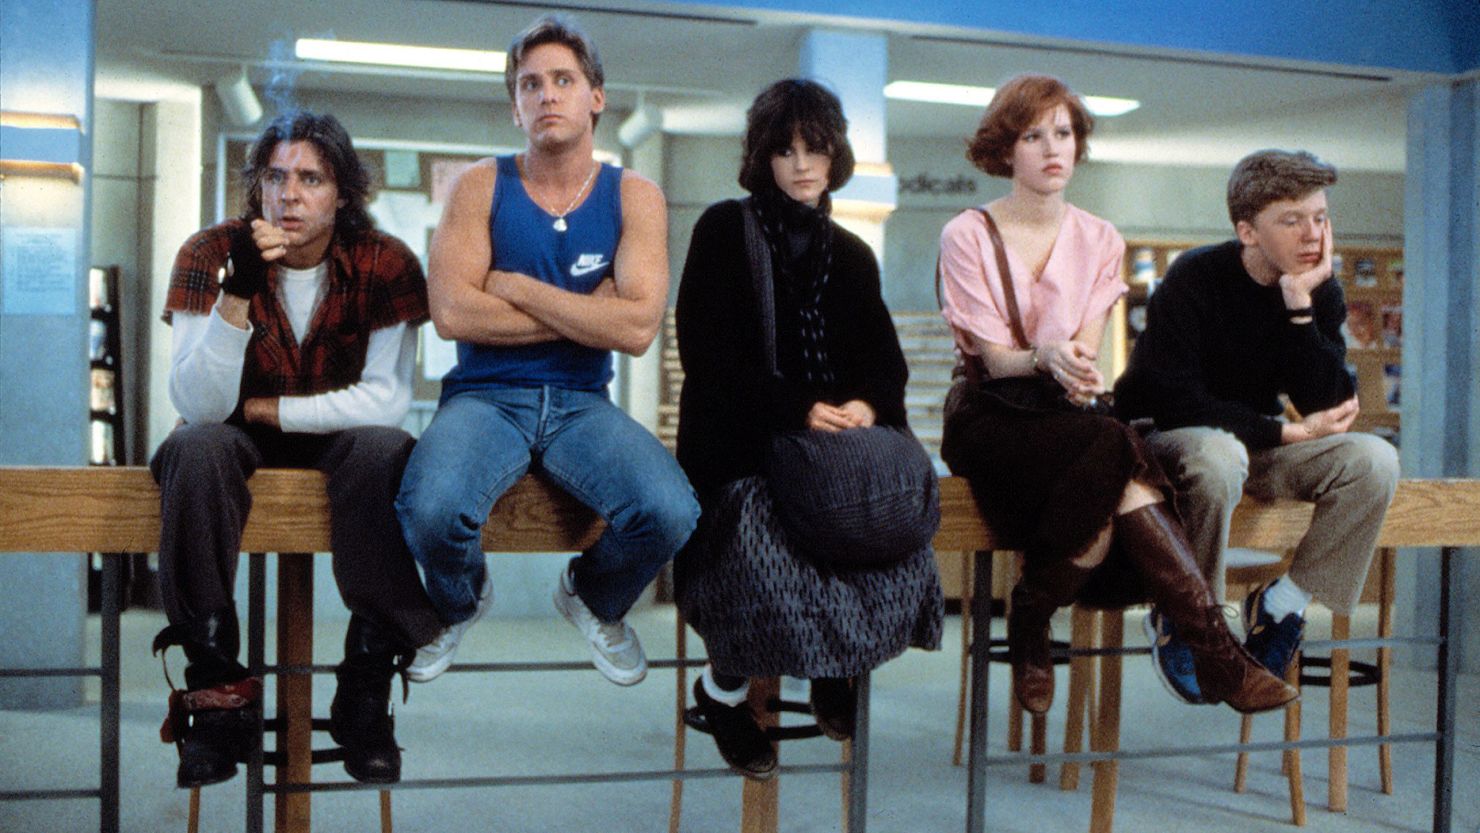 Judd Nelson, Emilio Estevez, Ally Sheedy, Molly Ringwald and Anthony Michael Hall, left to right, in "The Breakfast Club," a 1985 hit that helped cement the Brat Pack mystique.